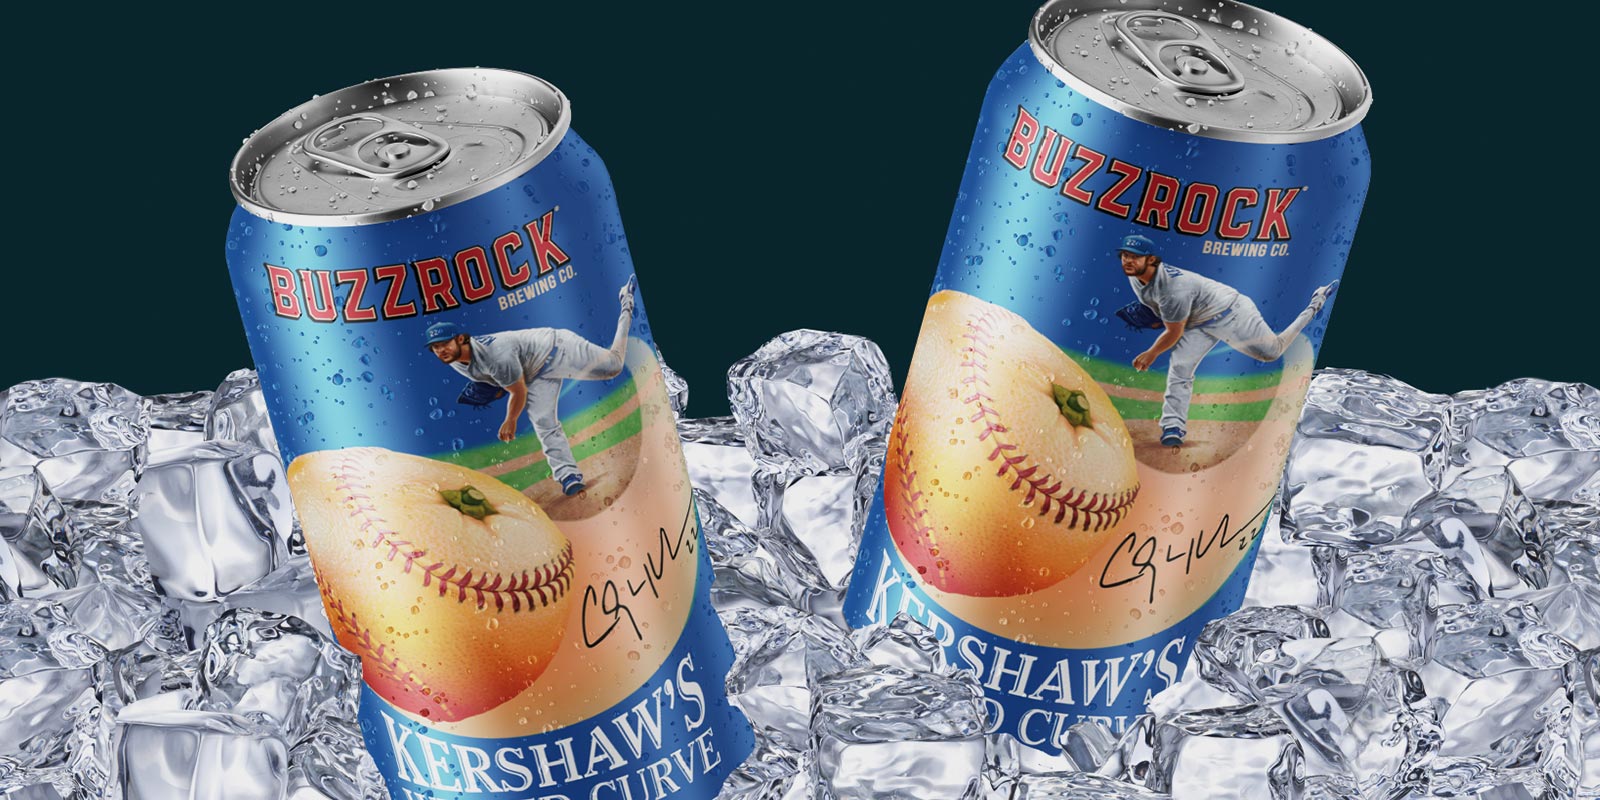 Kershaw's wicked curve raft beer can art on ice